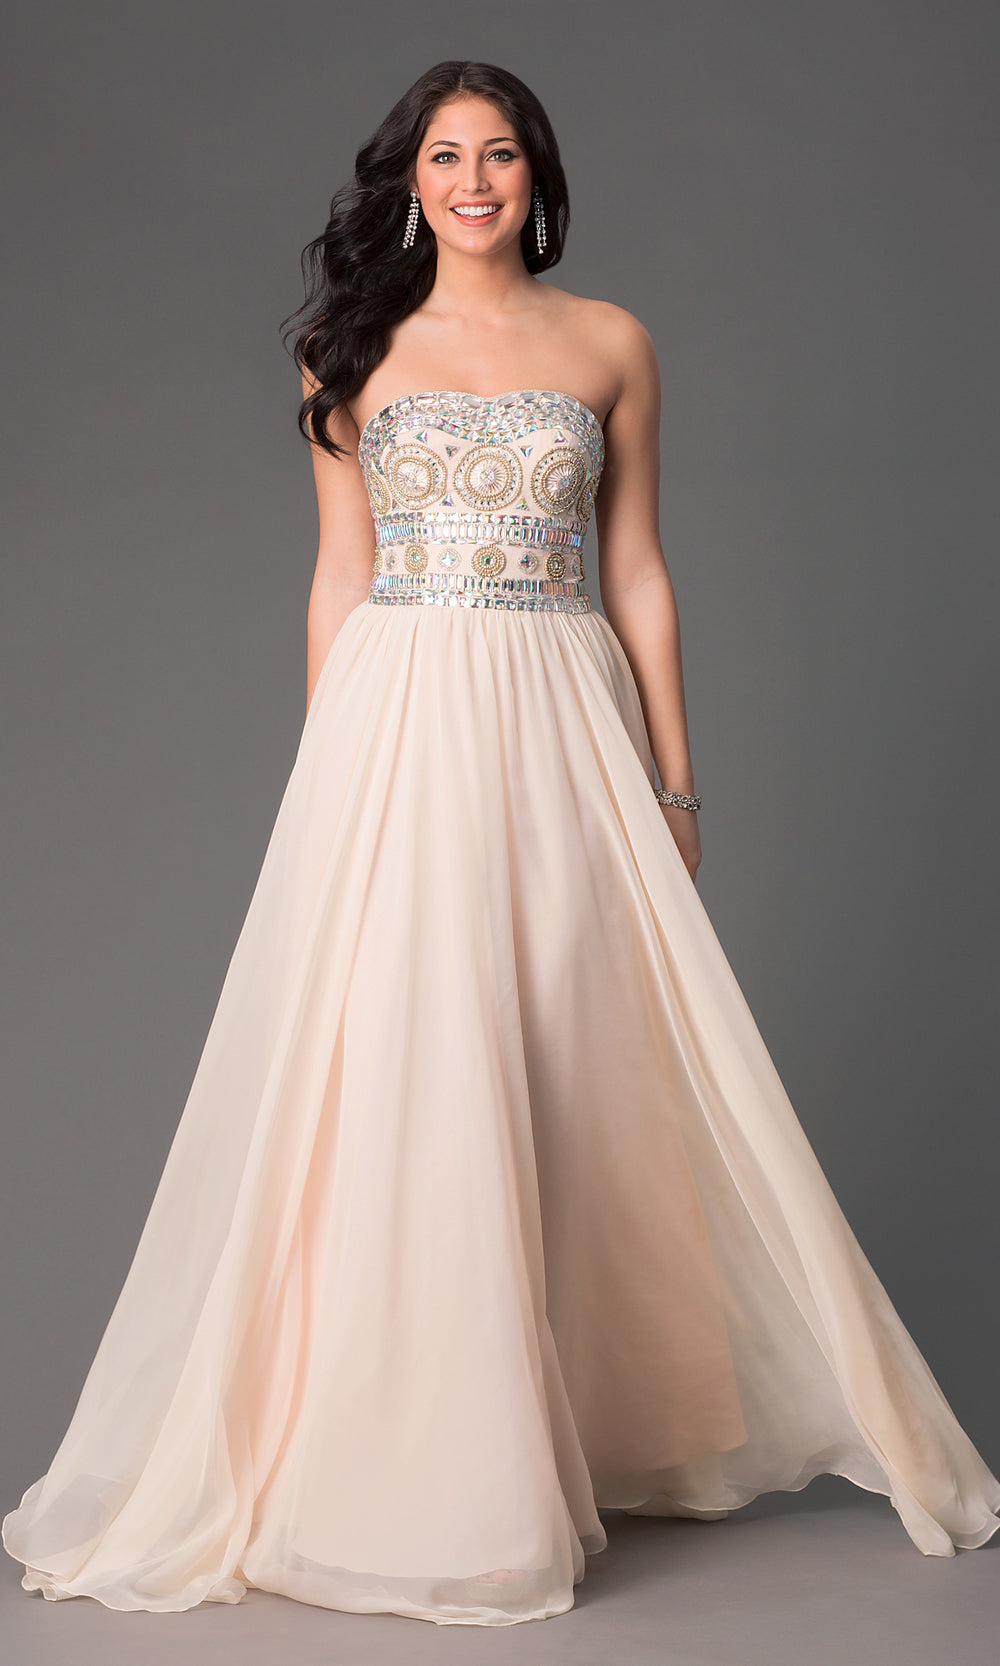 Nude Strapless Long Prom Dress With Beaded Bodice